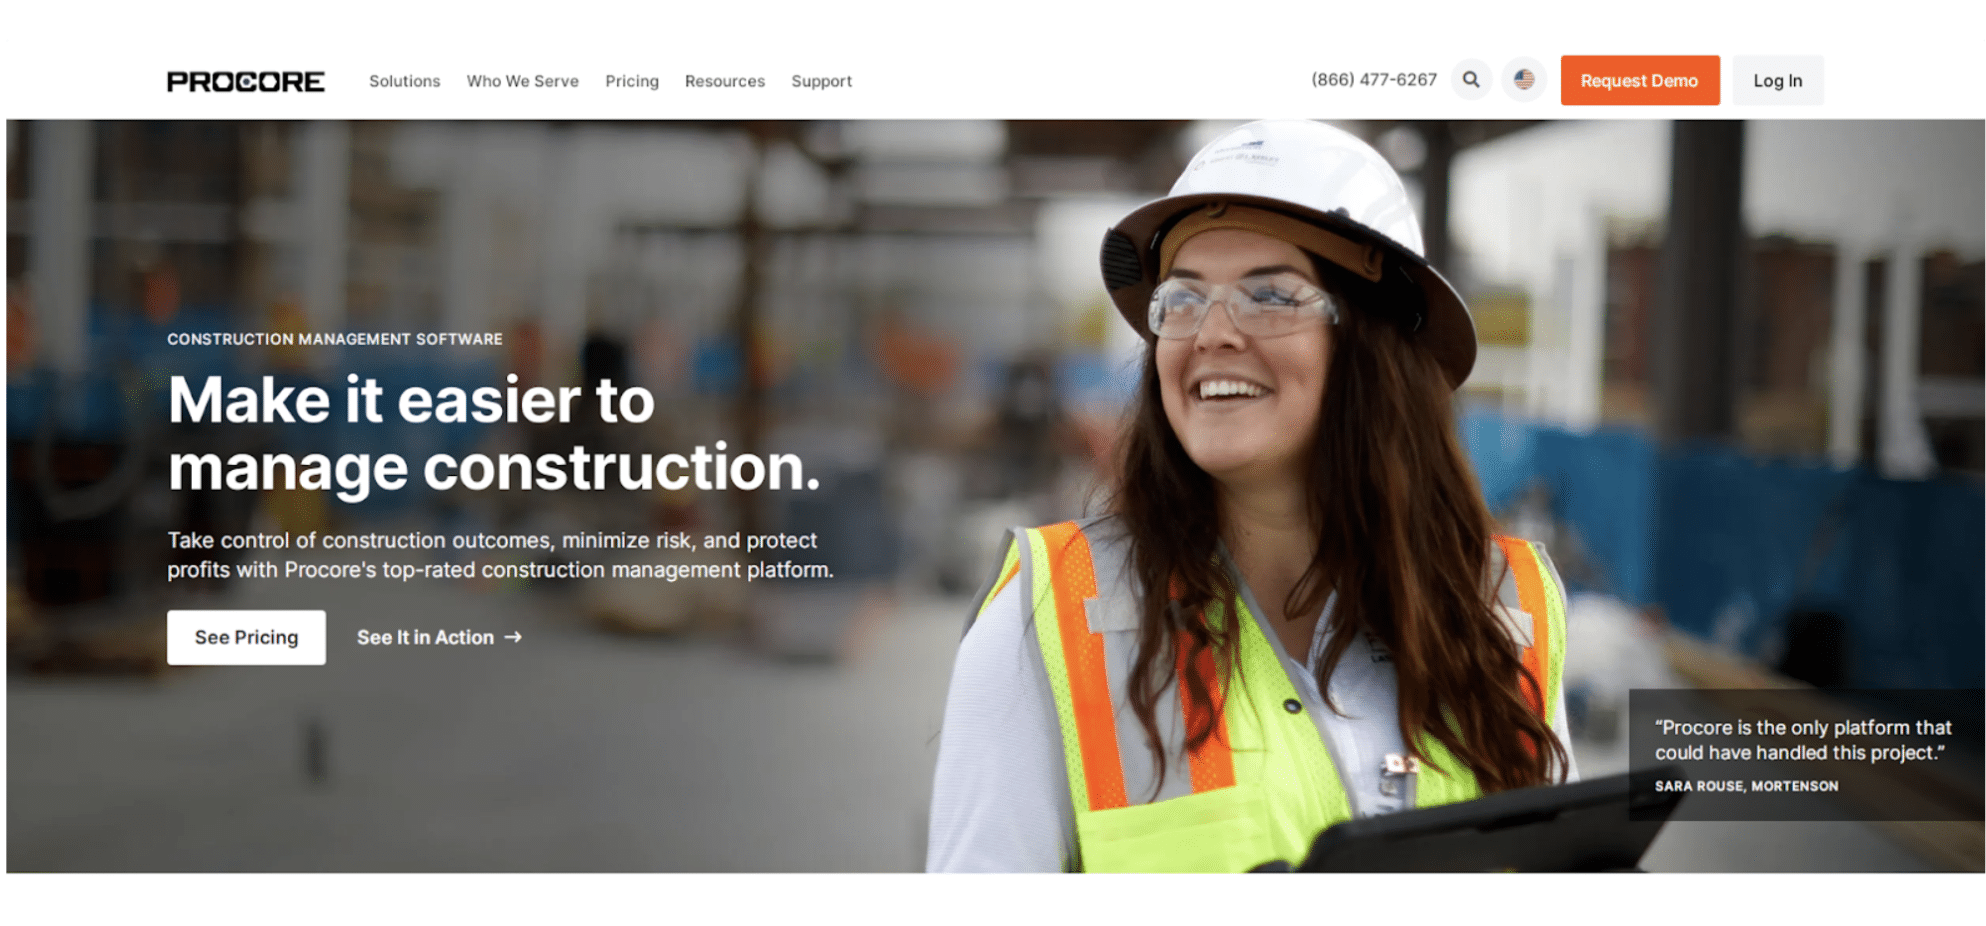 Procore CRM for Construction